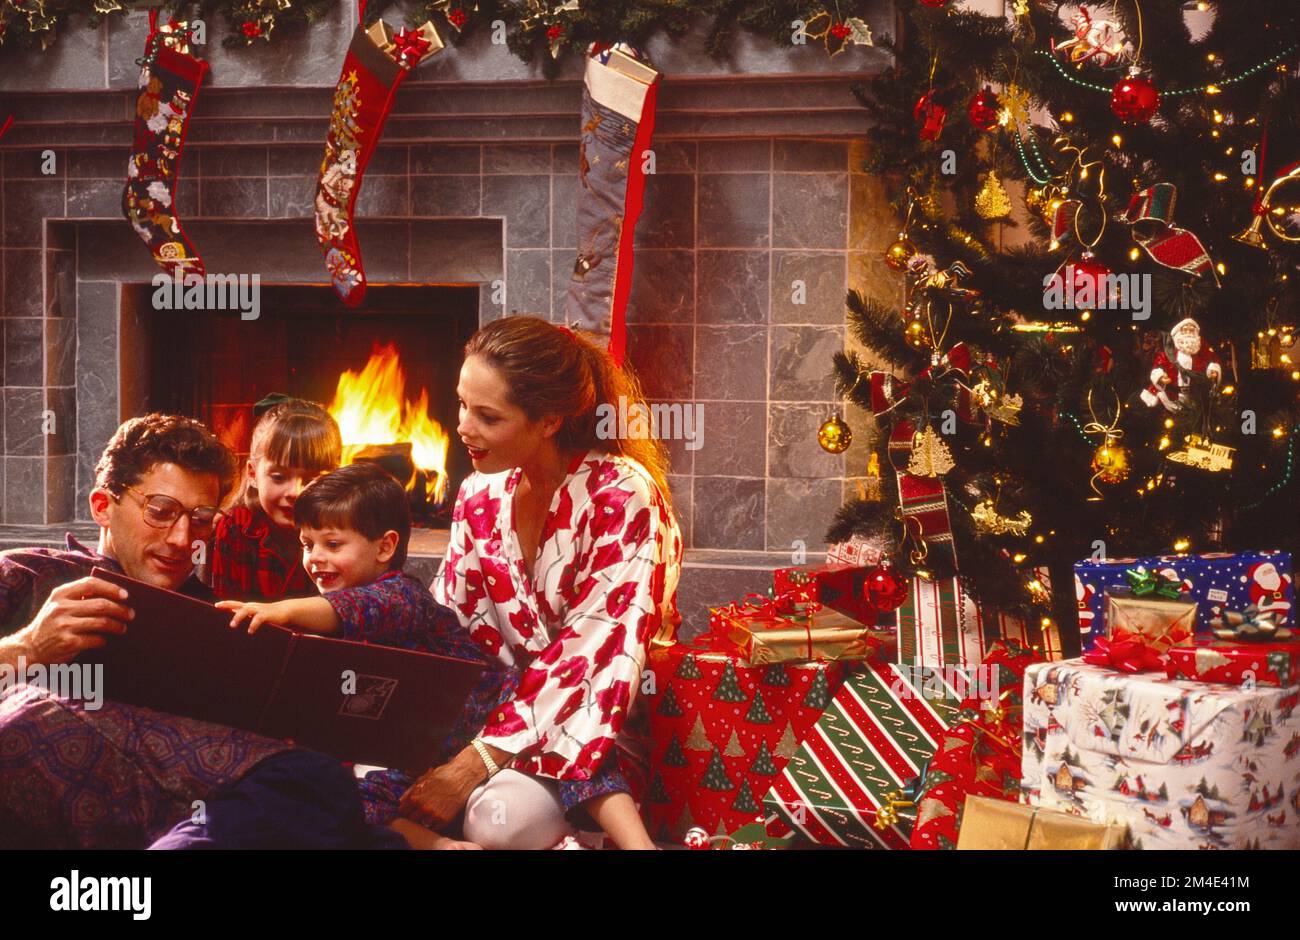 Family sitting on the floor in front of a fireplace with the Christmas tree presents and stockings hung from the mantel in the background Stock Photo